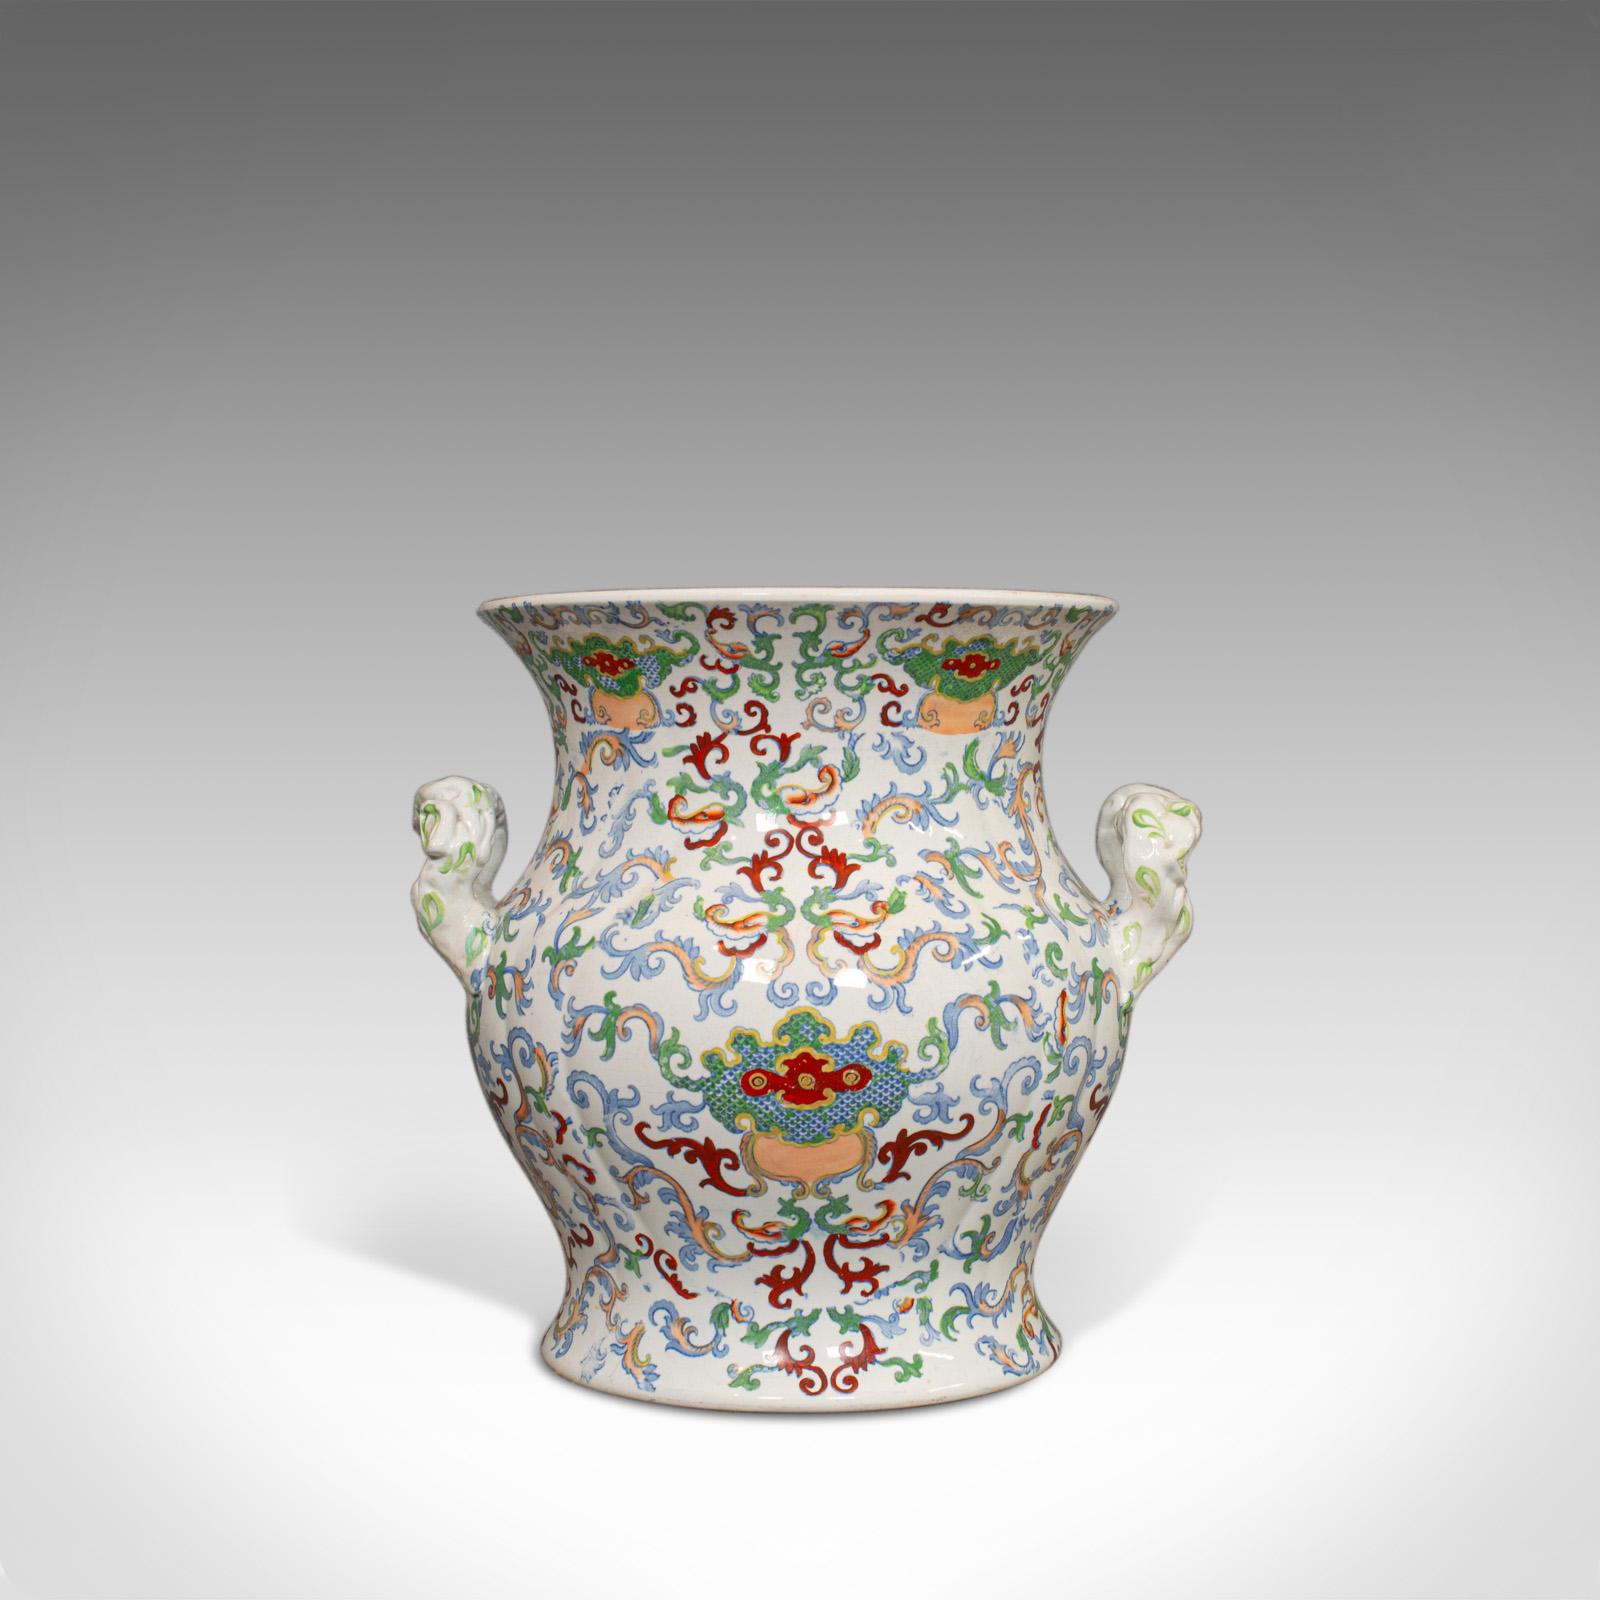 This is a large, vintage vase. An oriental, ironstone decorative pot or centrepiece and dating to the mid-20th century, circa 1950.

Of generous proportion with 19cm (7.5